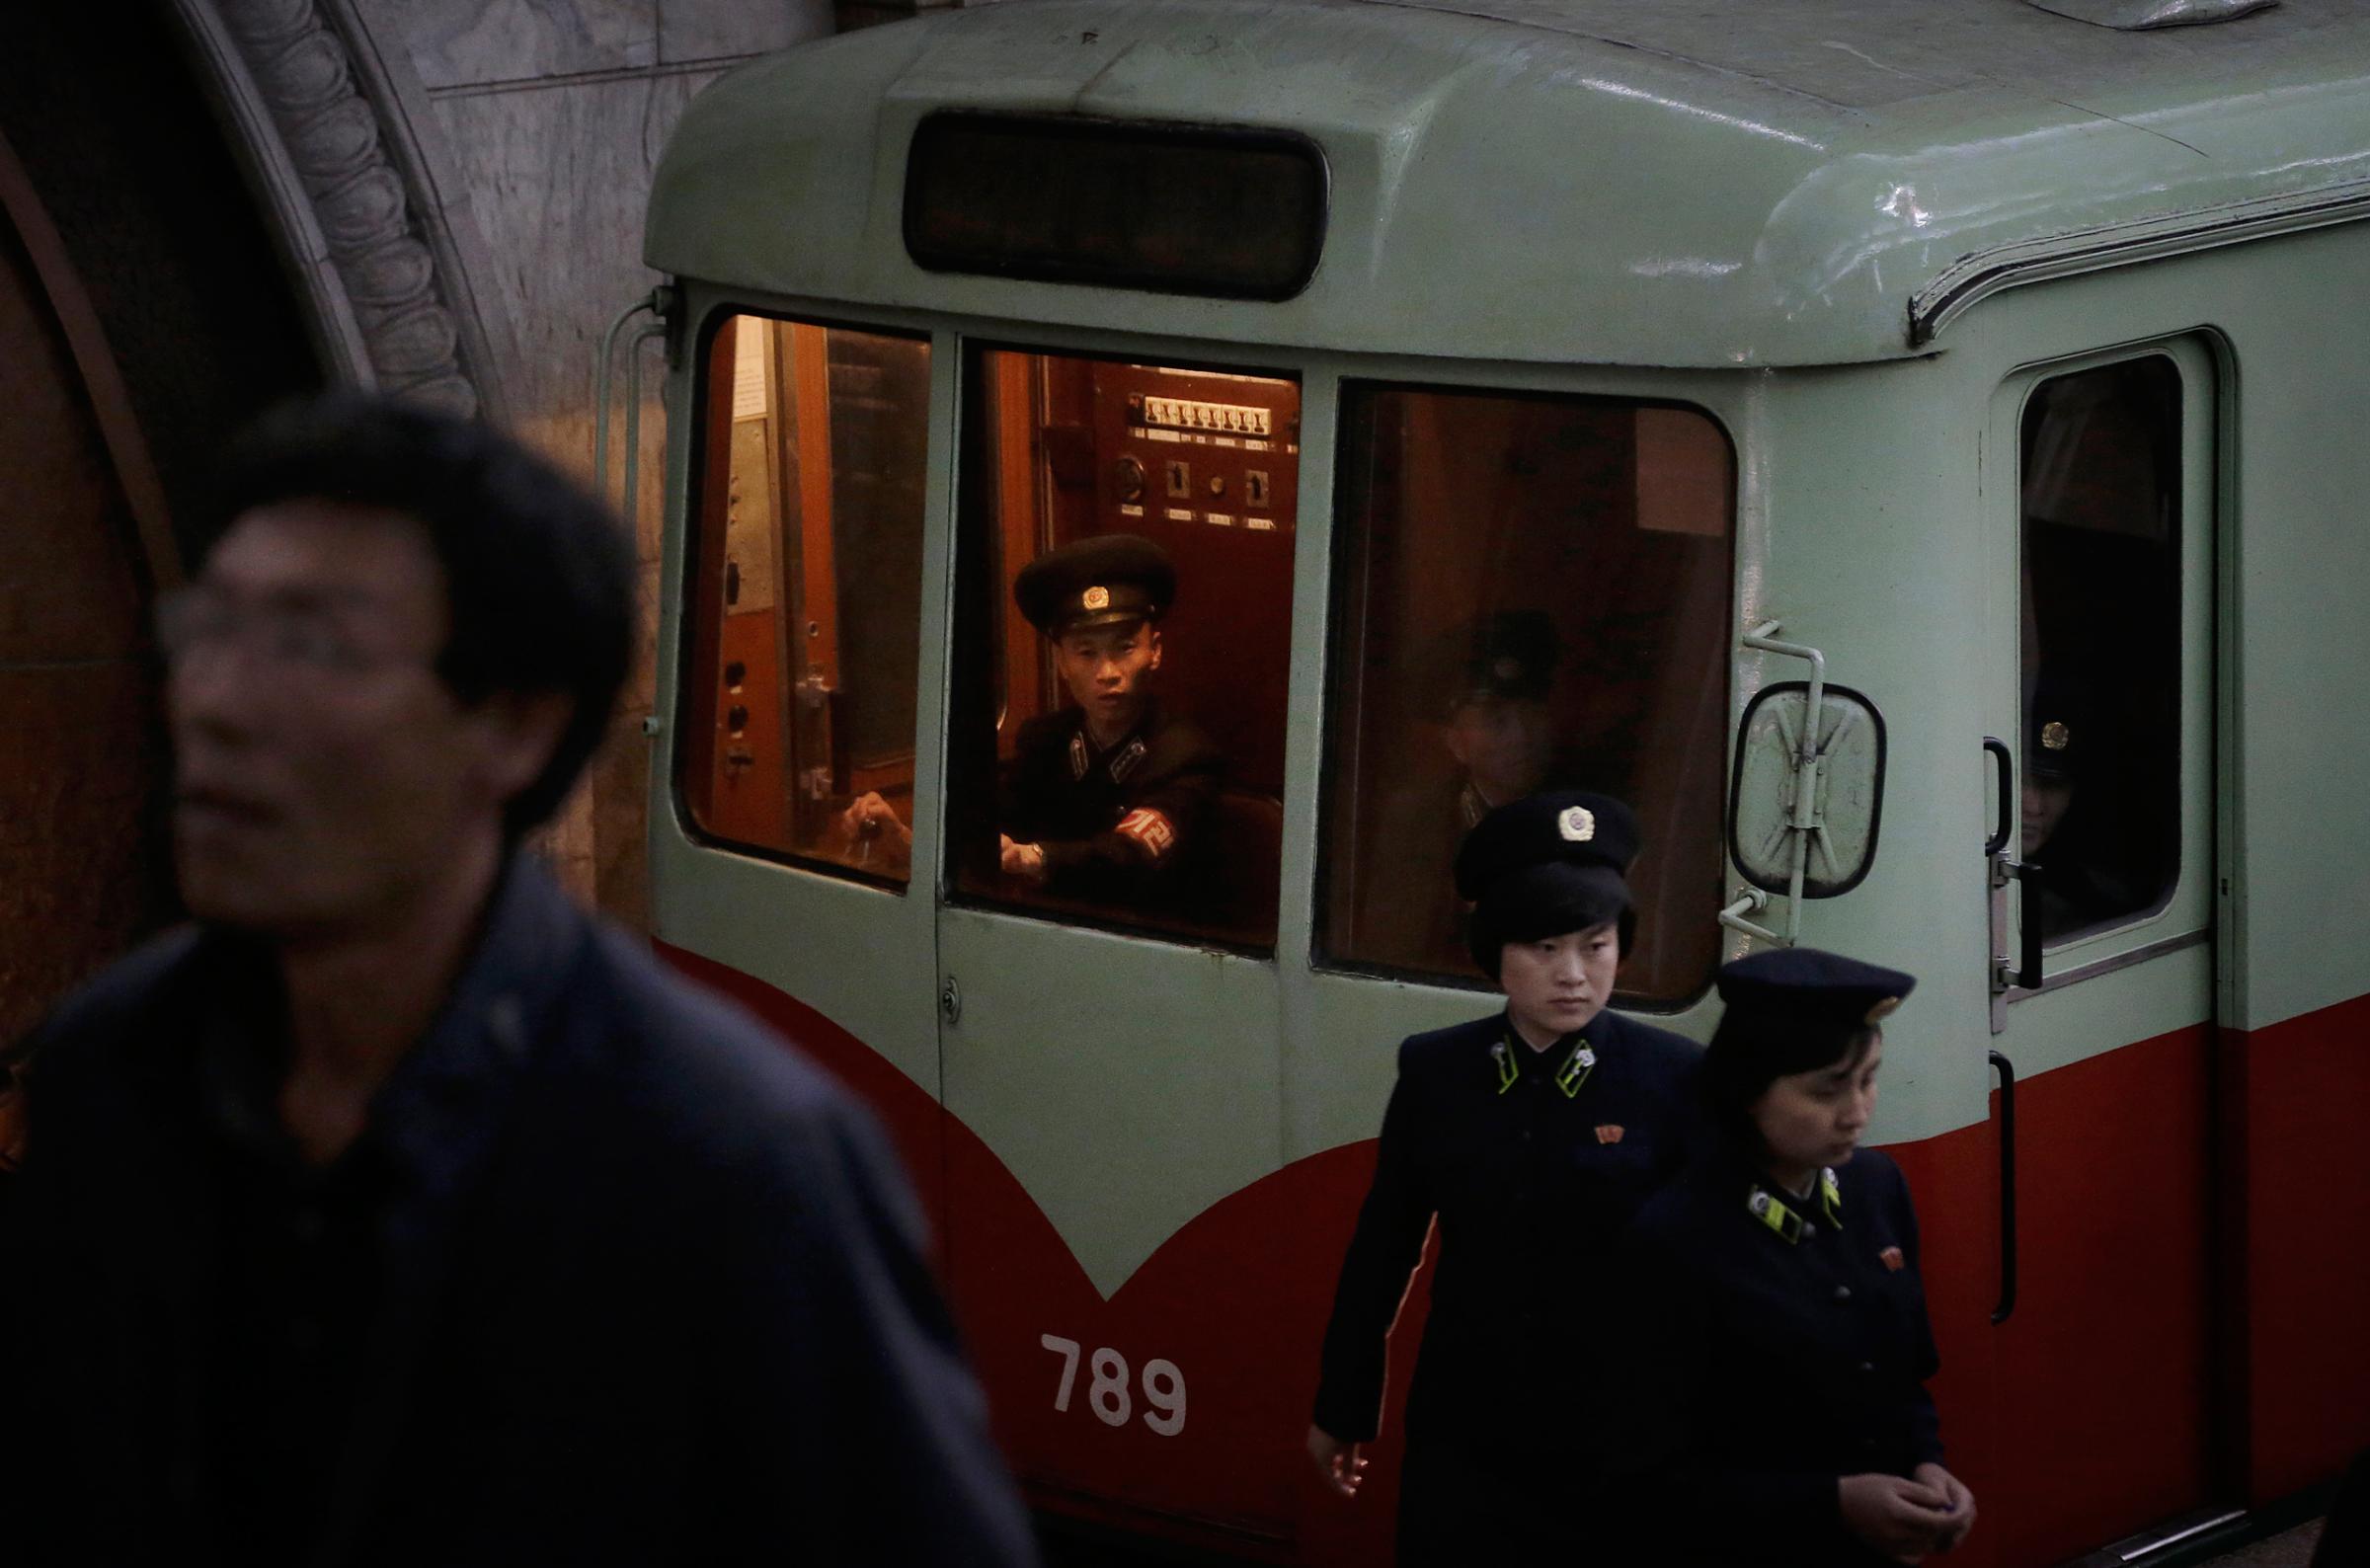 A train conductor and station attendants work in a subway station as seen during a press tour on Saturday, May 7, 2016, in Pyongyang, North Korea. North Korea's ruling party is preparing to bestow its top title on leader Kim Jong Un, another clear sign that the third heir to North Korea's dynasty of Kims is firmly in control despite his country's deepening international isolation over one of his key ambitions, to keep developing more and better nuclear weapons. (AP Photo/Wong Maye-E)